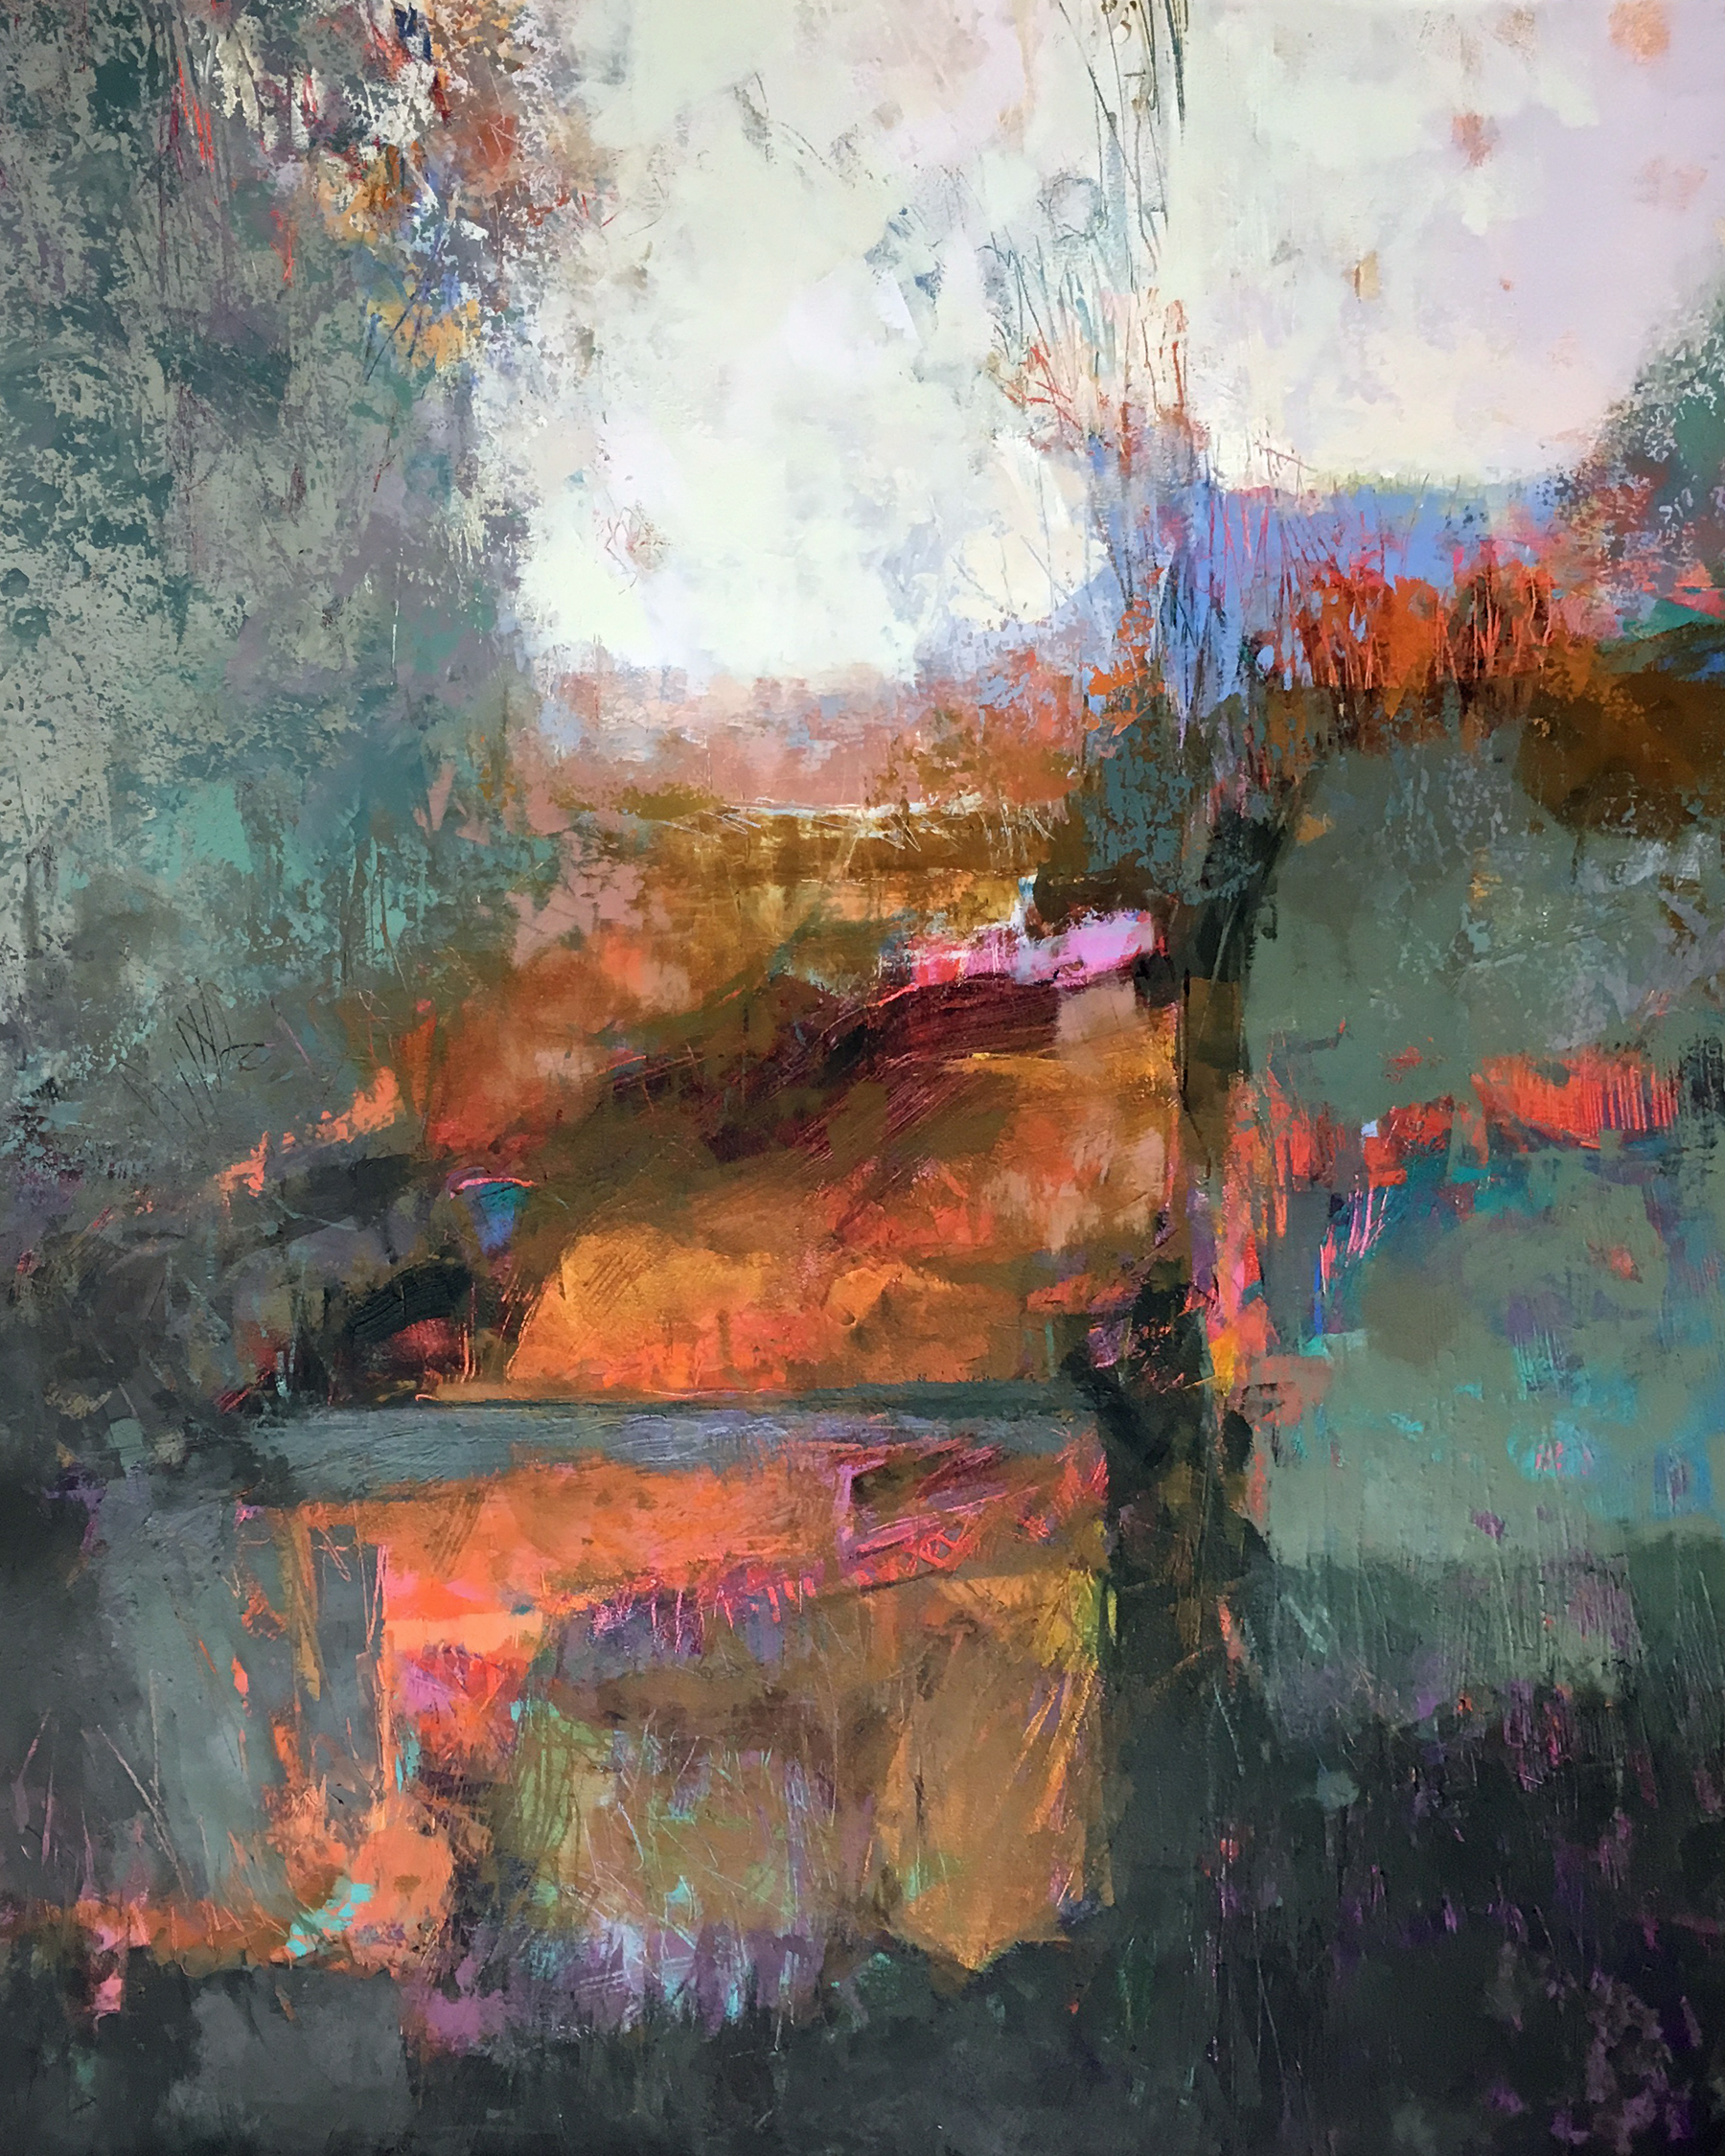    Palisades Reflections    oil/cold wax on cradled panel  39.75” x 31.75” x 1.5”   SOLD  